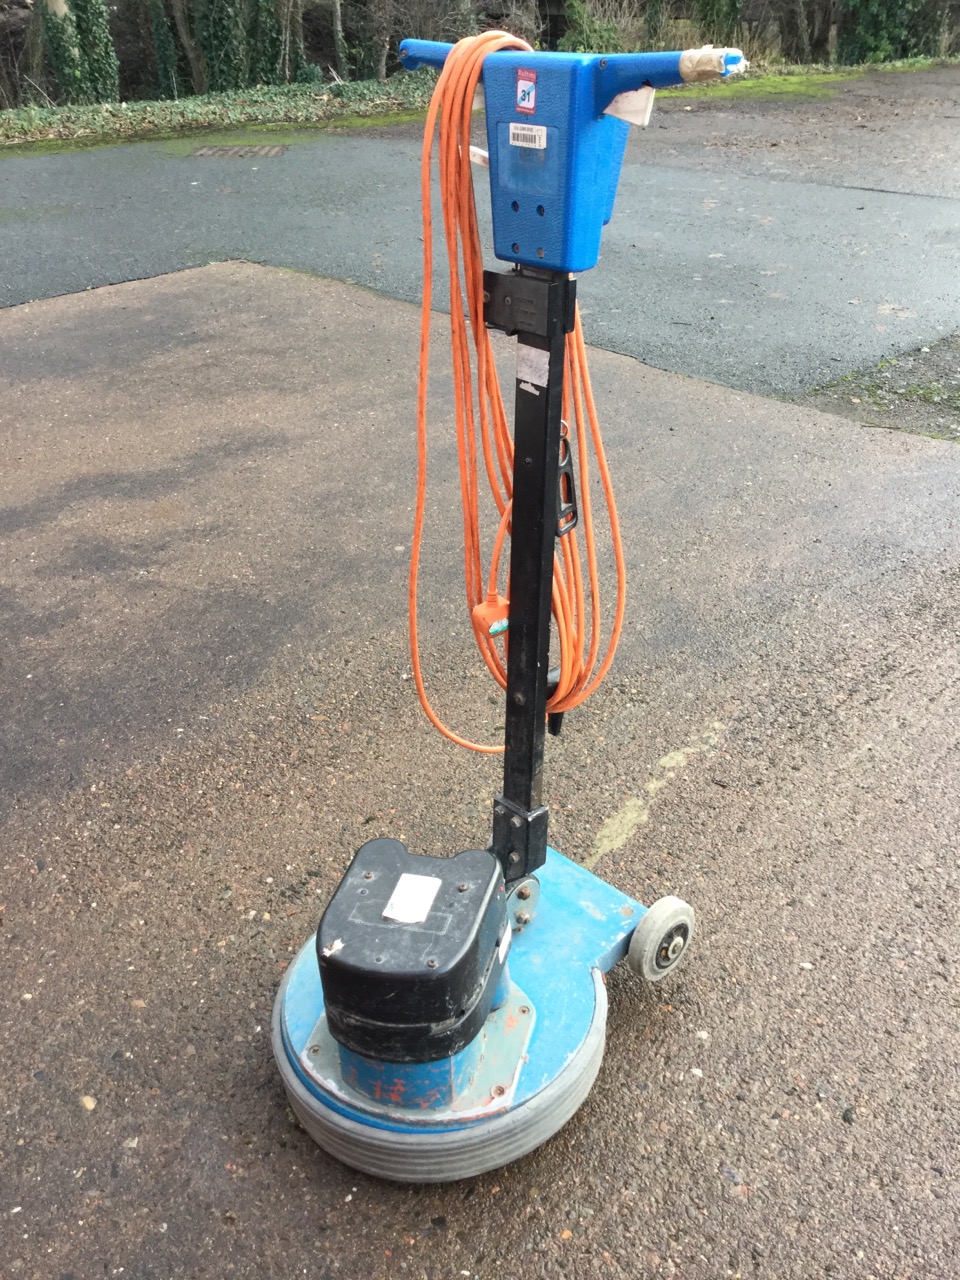 An electric floor polisher with long power cable.